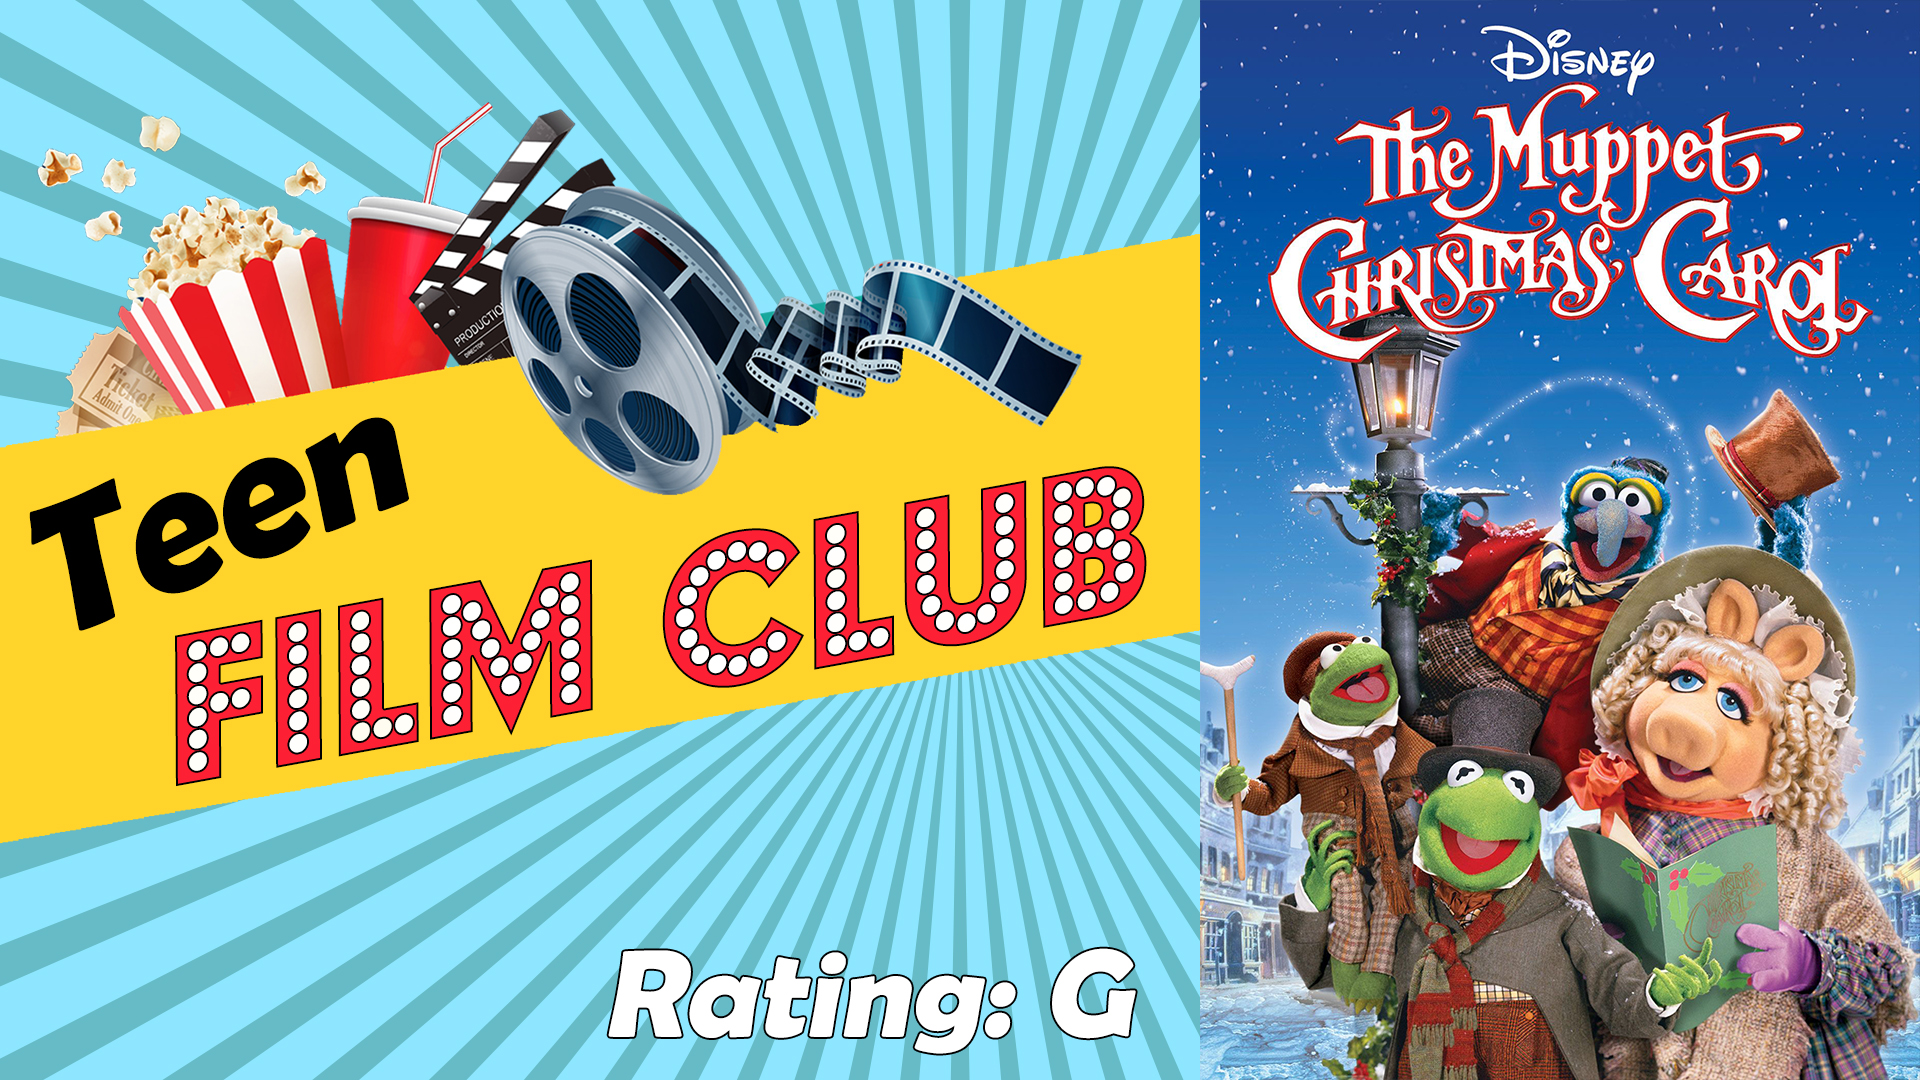 Image reads "Teen Film Club" against a gold banner on a blue sunburst background. A movie reel, cup, popcorn container, and tickets are on the top of the banner. The Muppet Christmas Carol movie poster fills the right side of the image. Says "Rating: G".